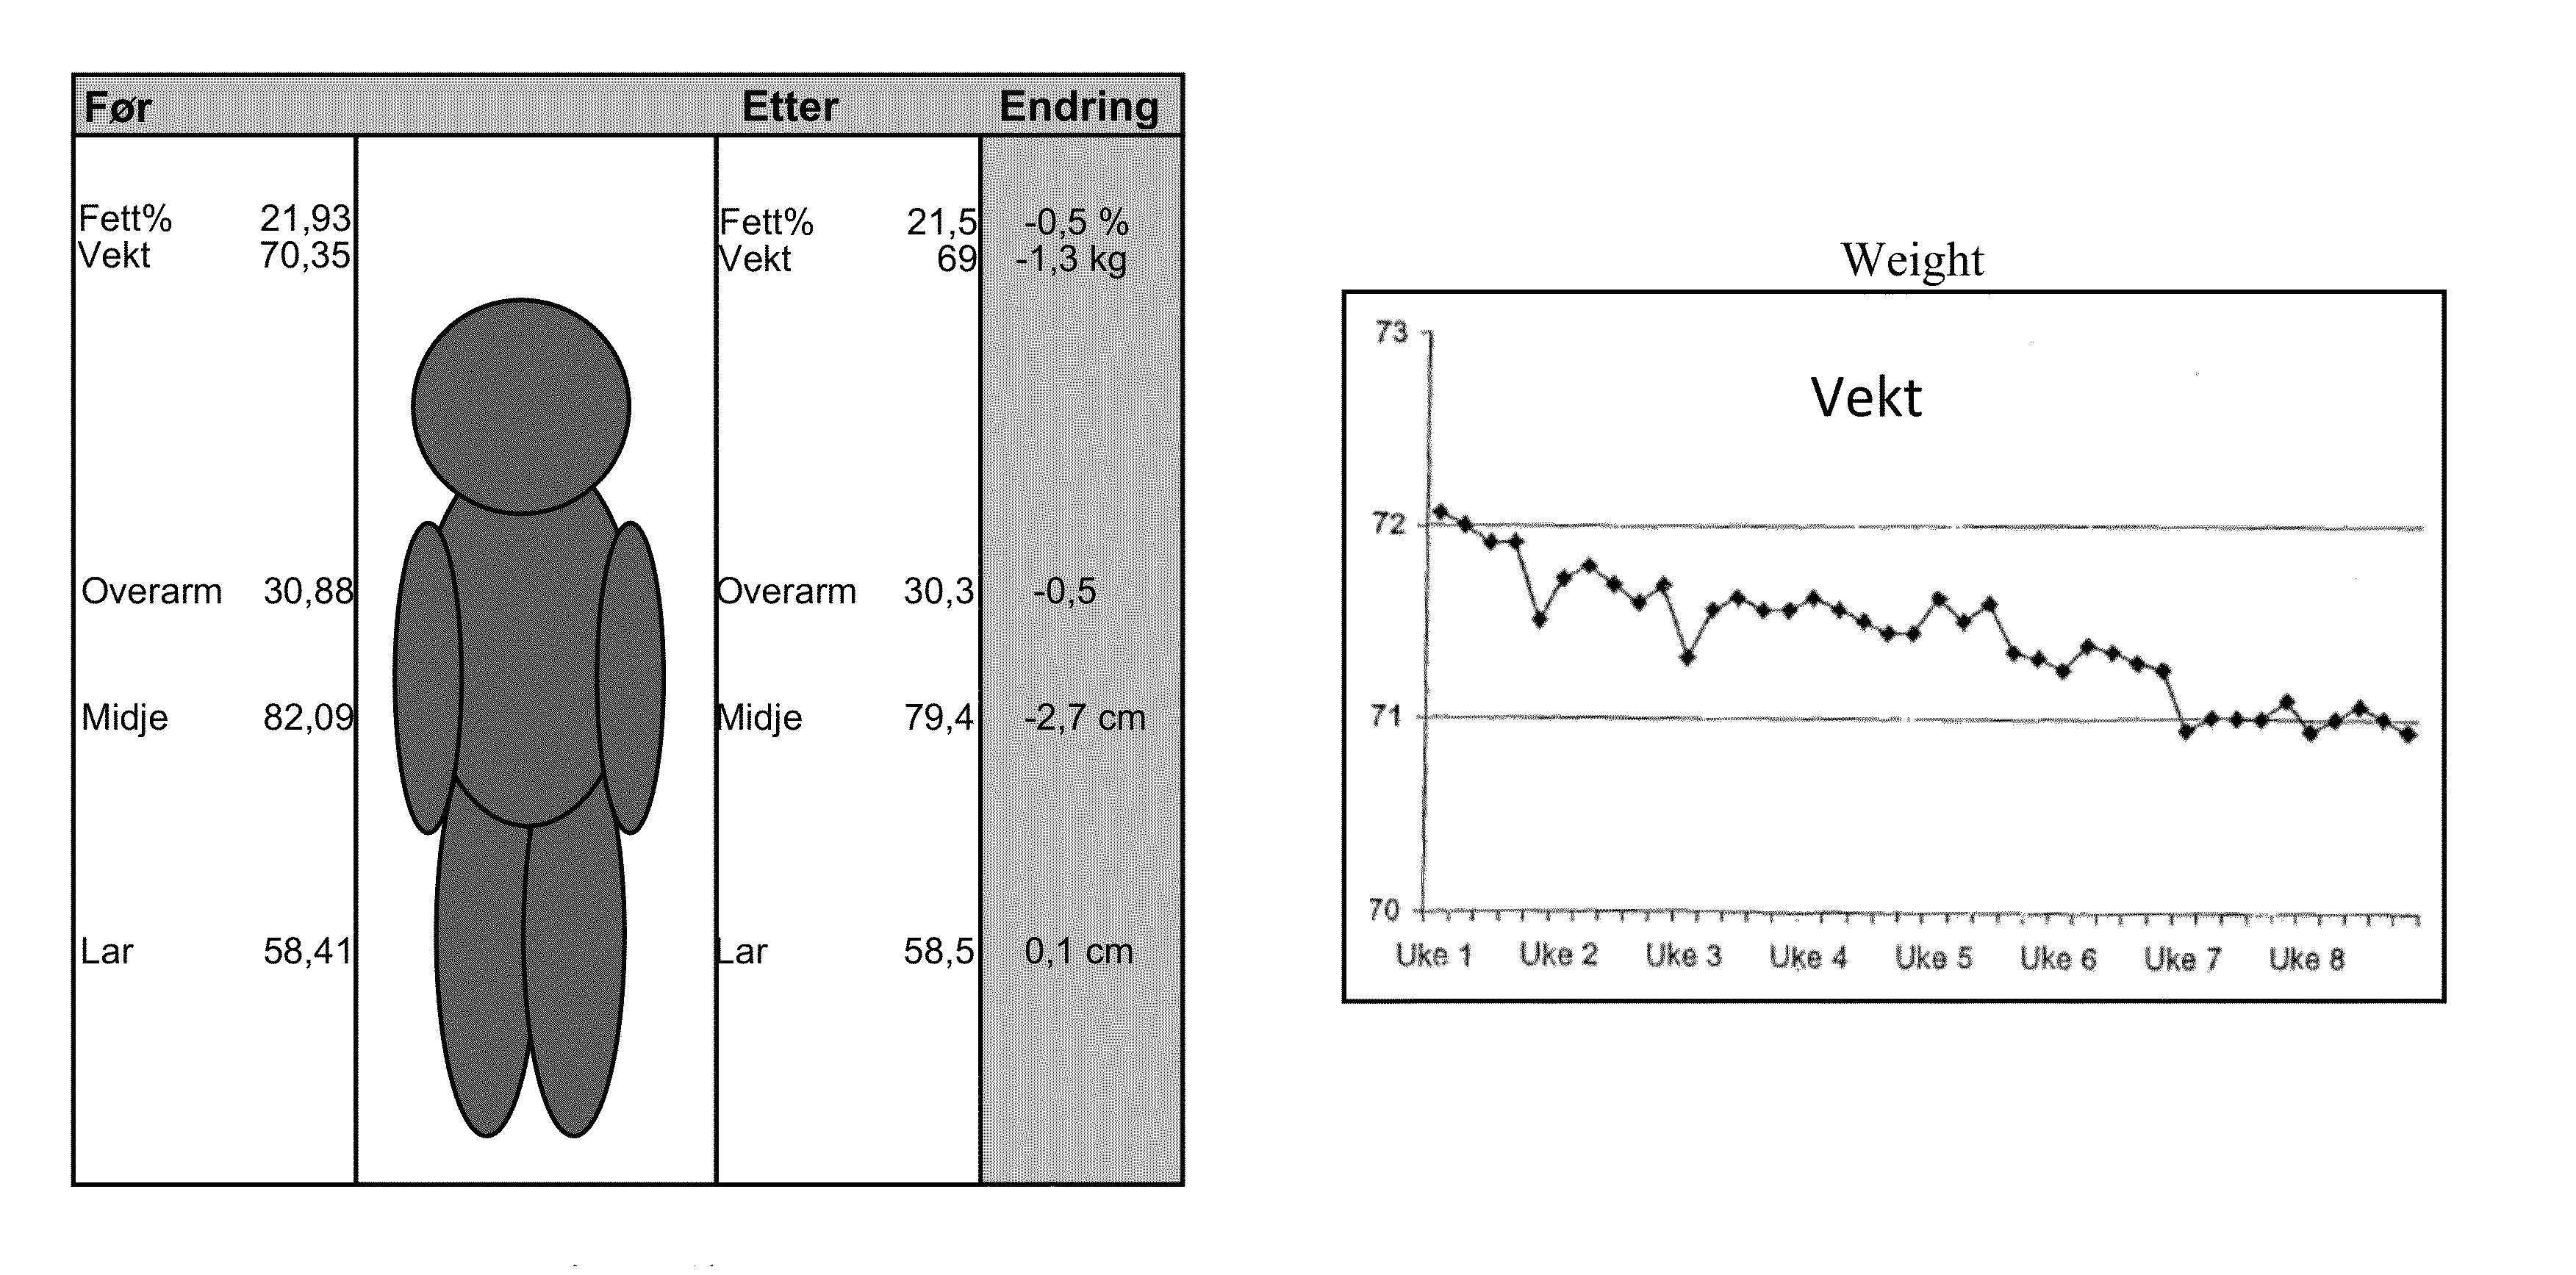 NGNA compositions and methods of use